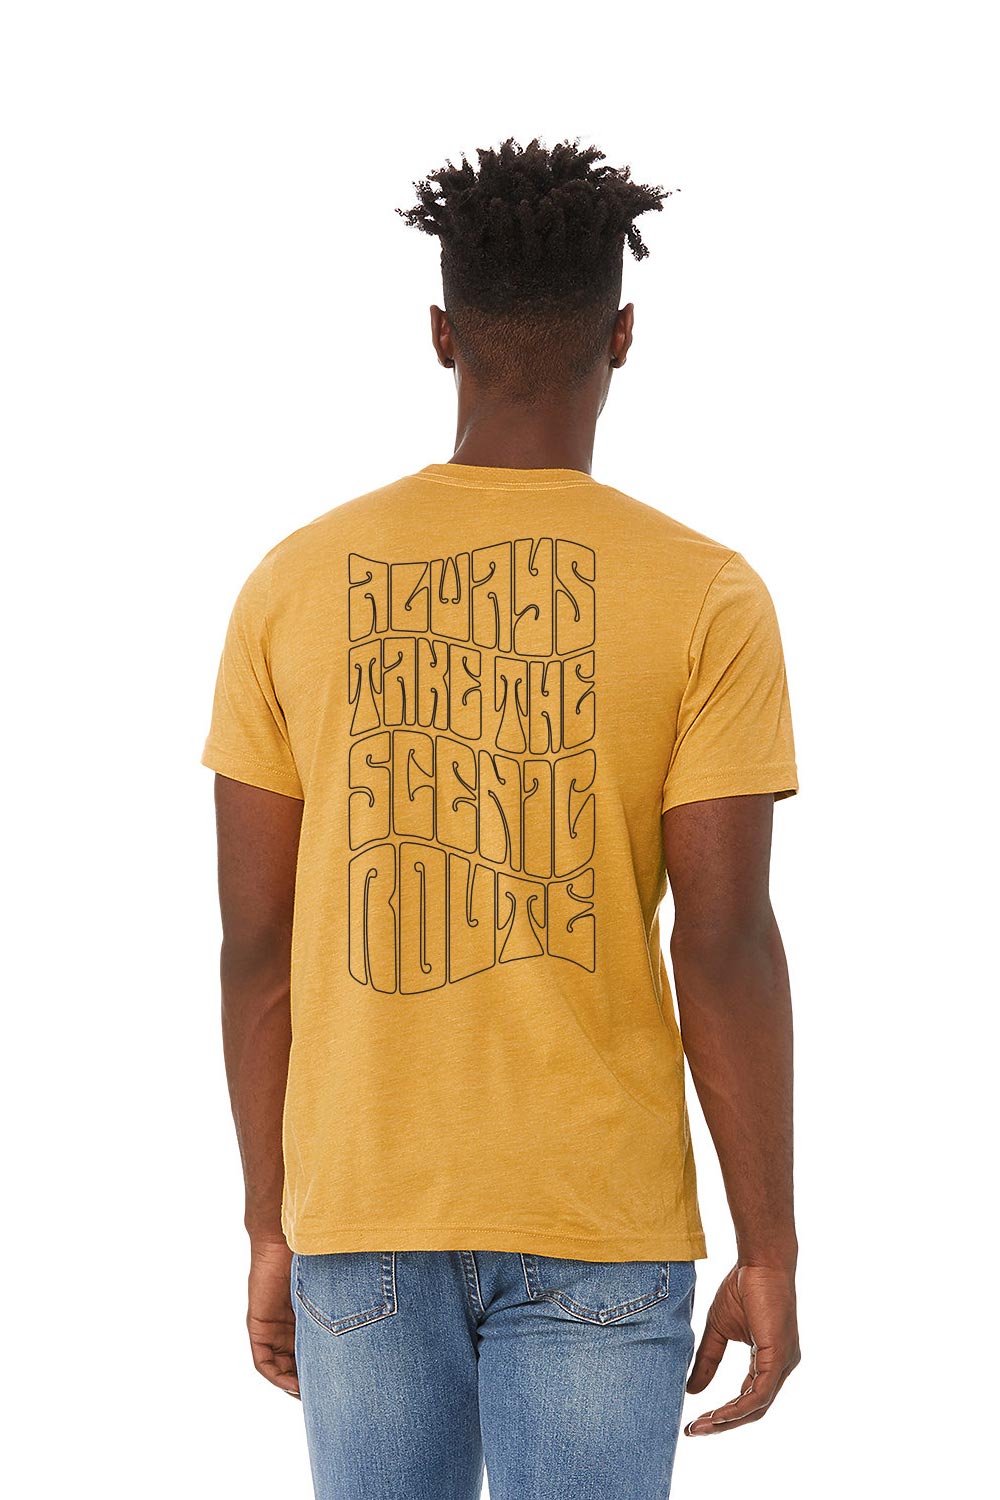 Always Take the Scenic Route T-Shirt (Heather Mustard)